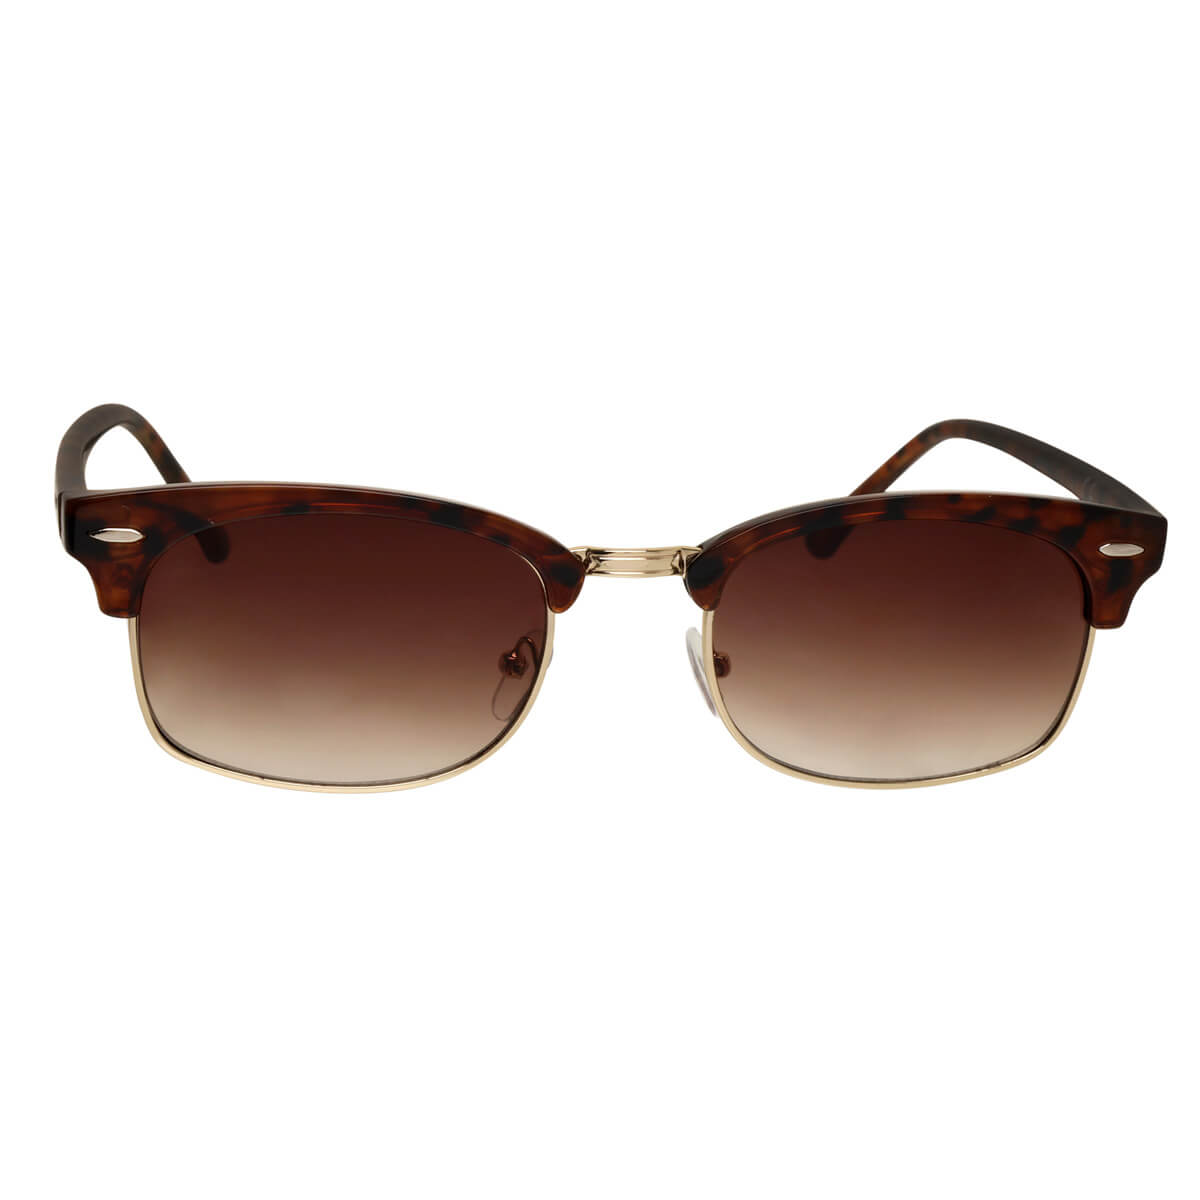 Low clubmaster sunglasses